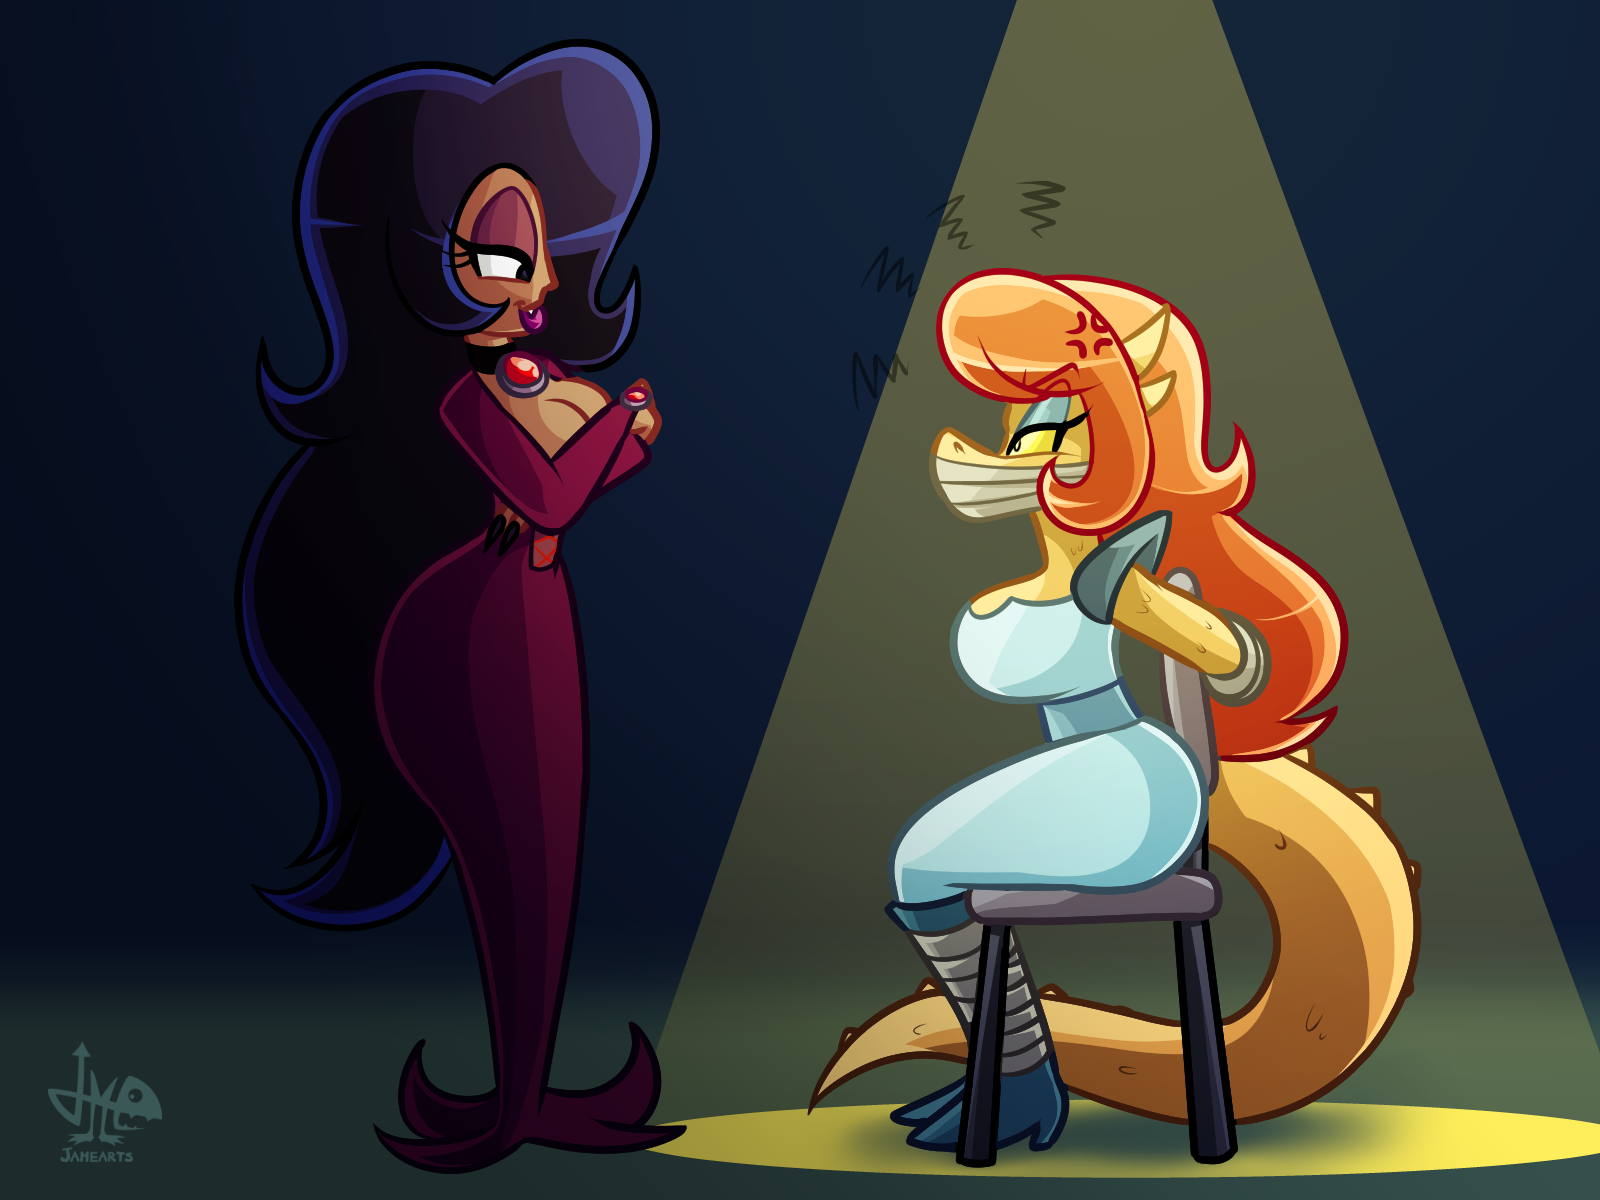 Vip jammer and nightshade by junemacaw on DeviantArt